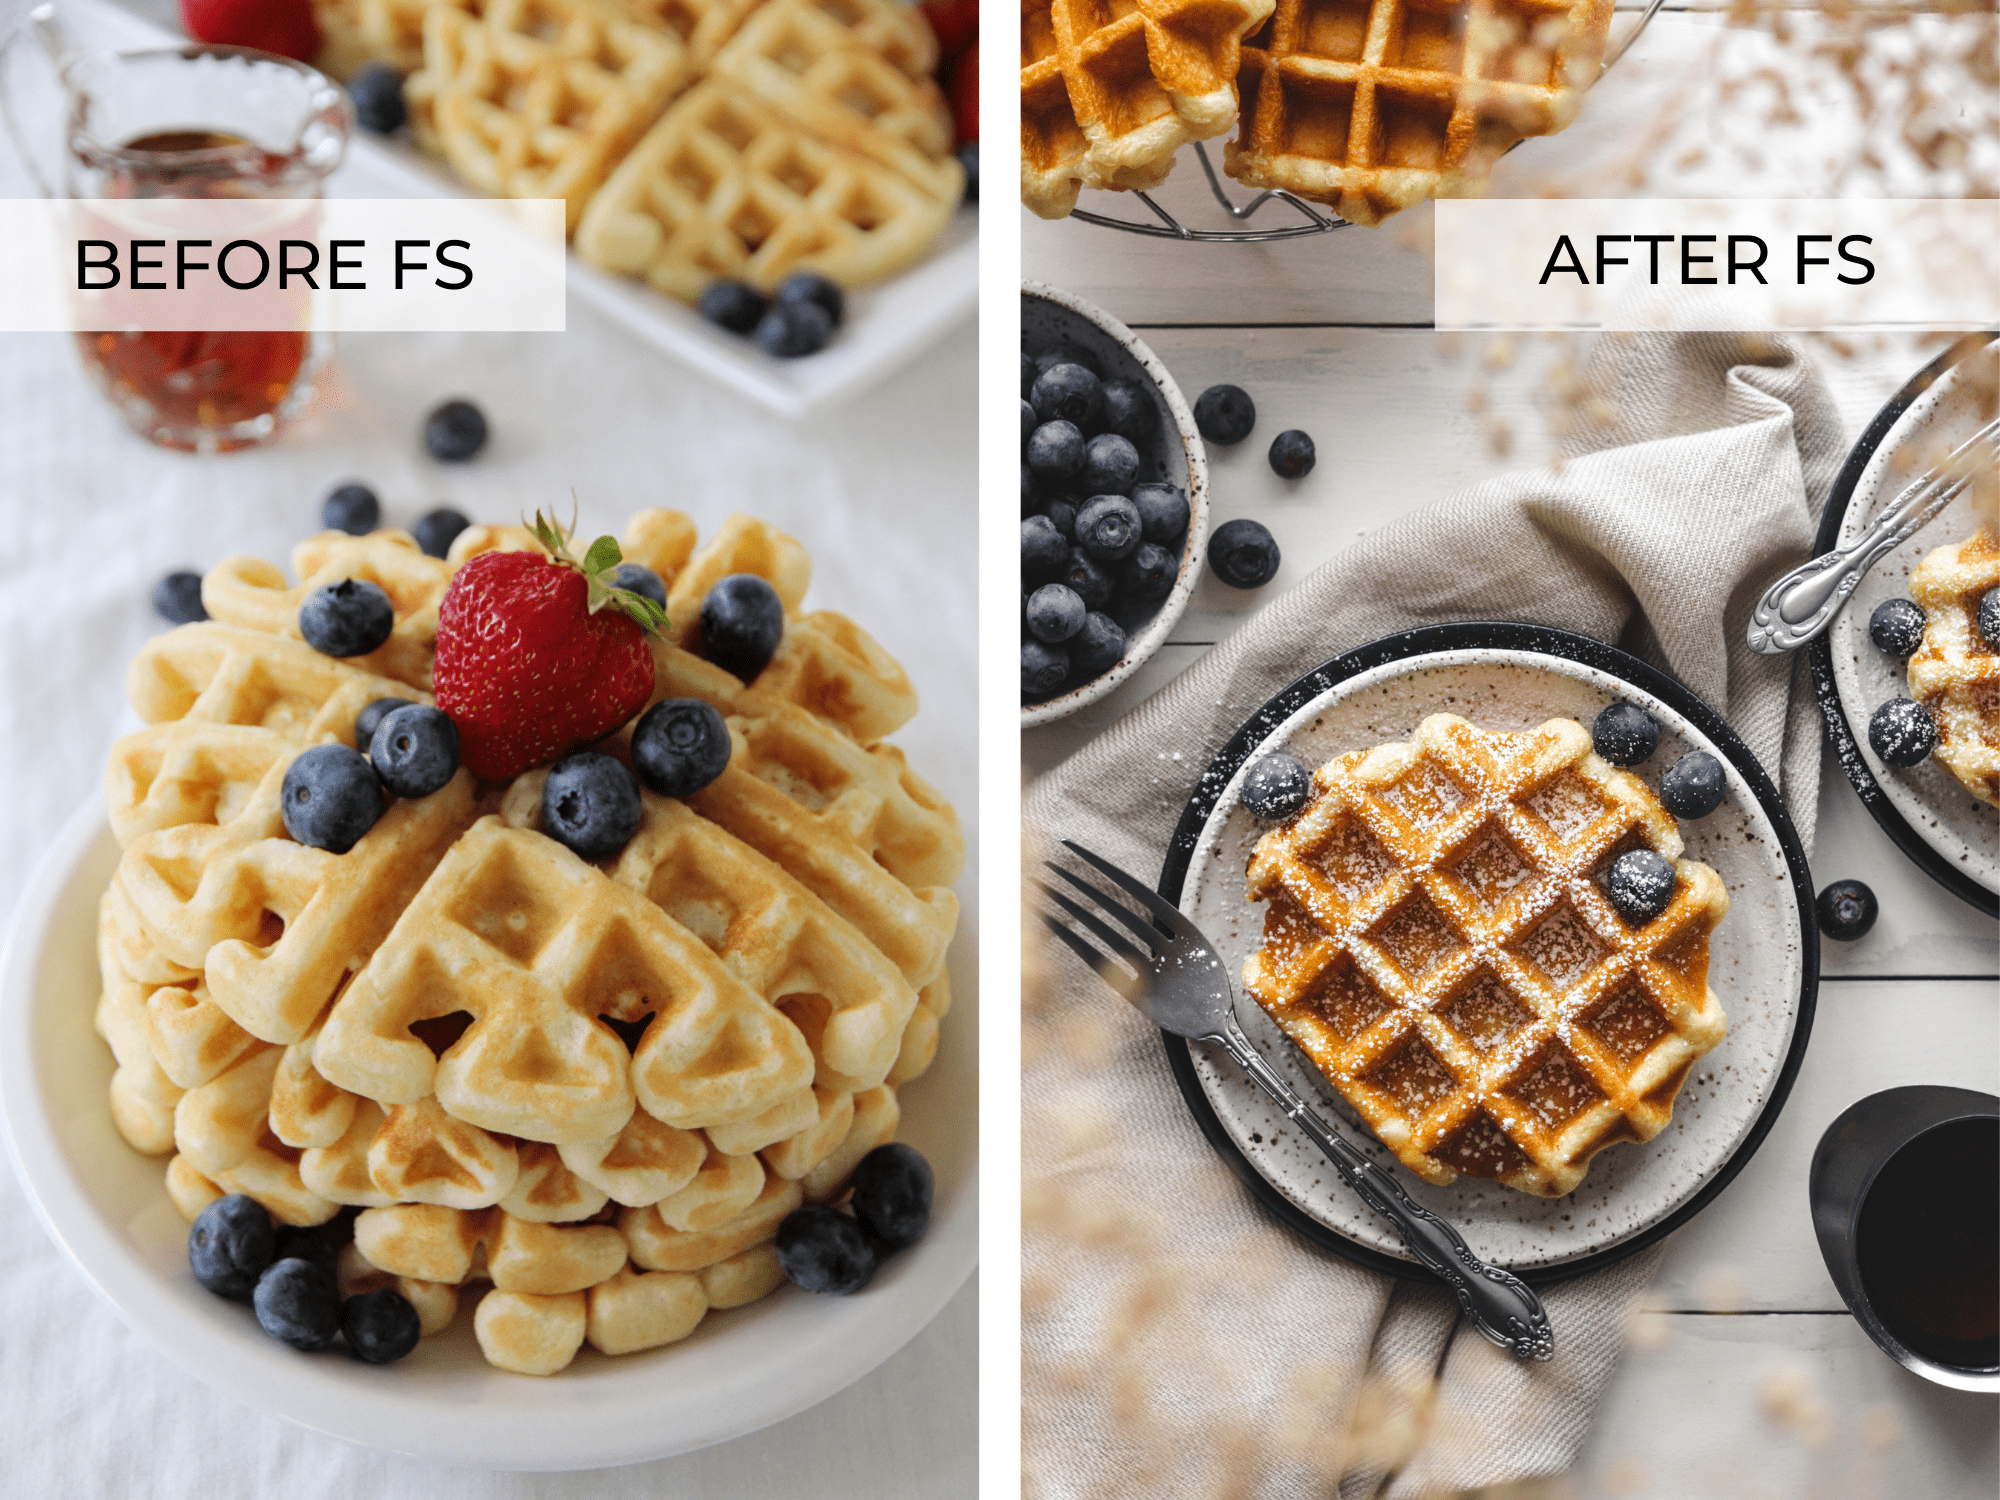 SIDE BY SIDE IMAGES OF WAFFLES, BEFORE AND AFTER Foodtography School